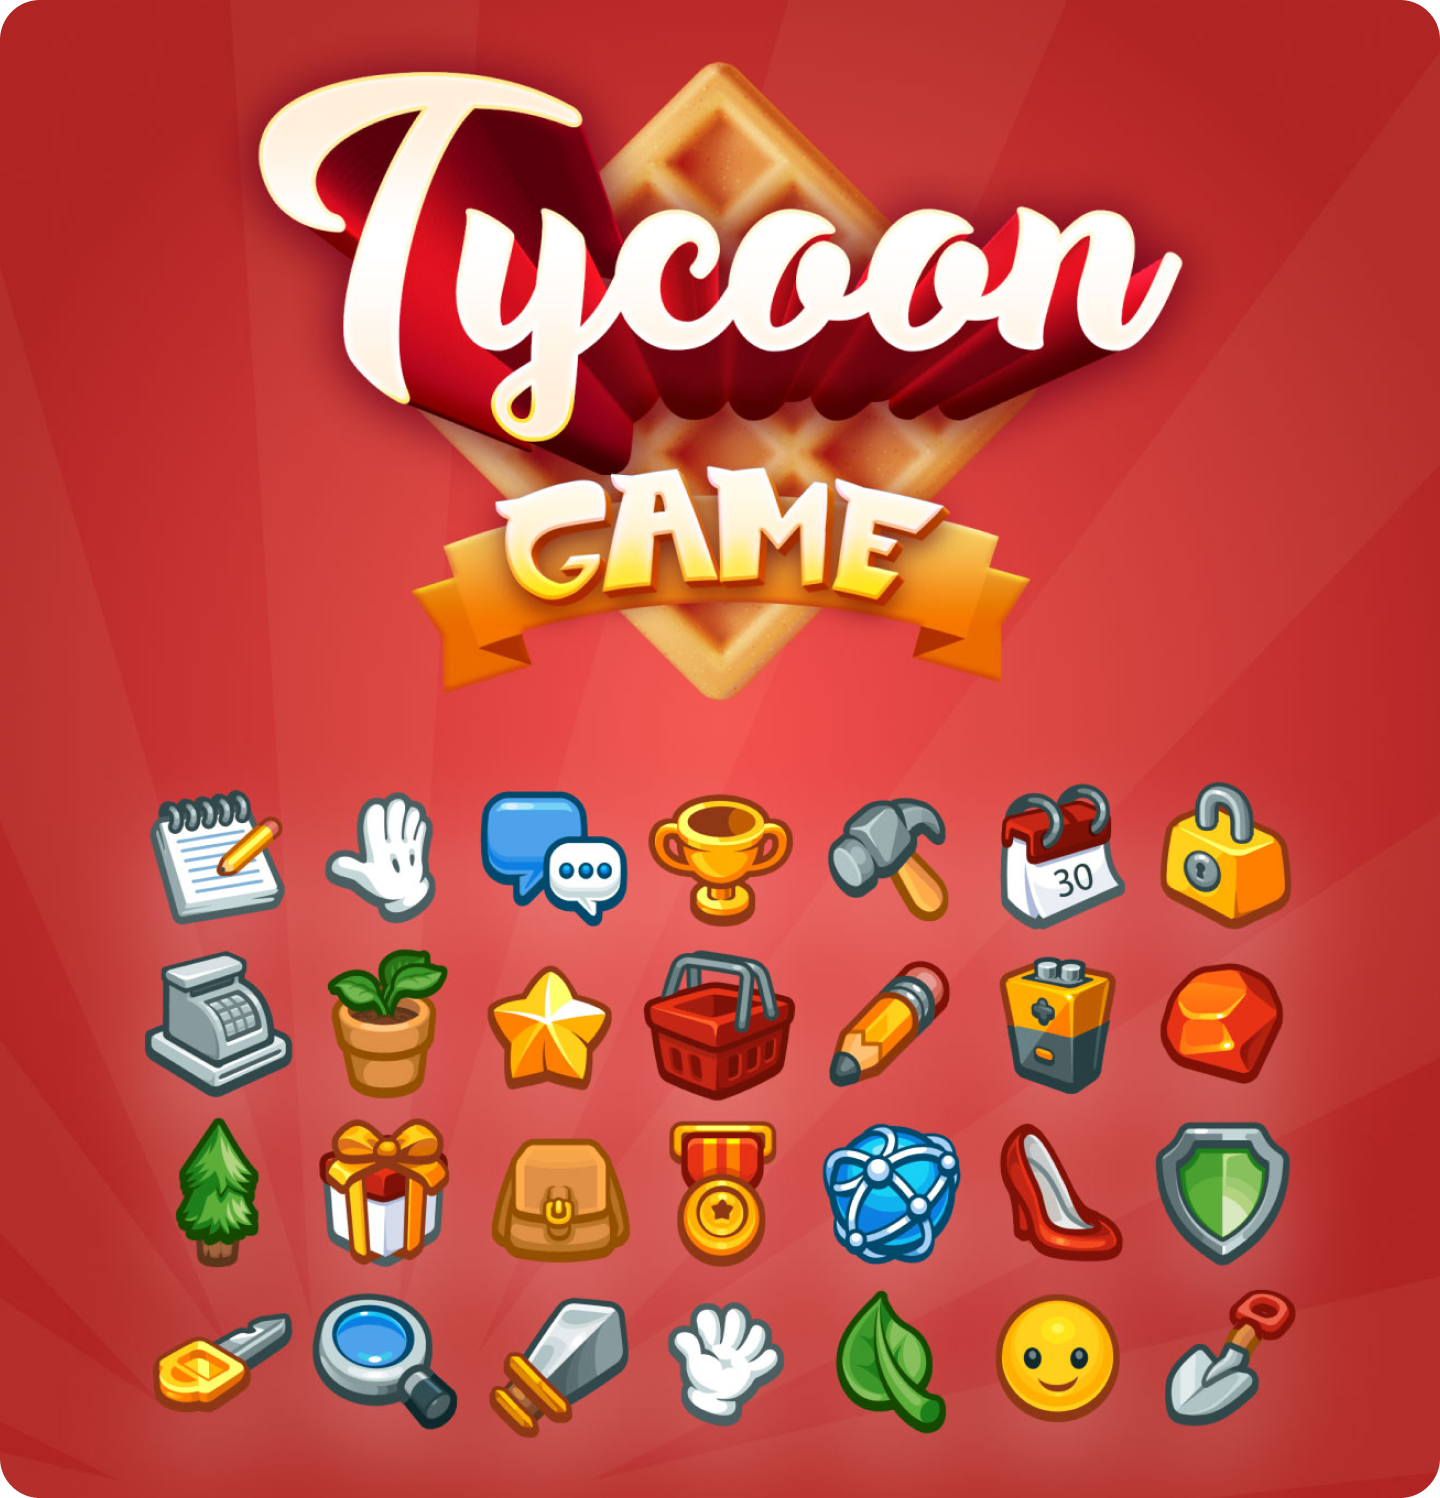 Publishing a Tycoon game